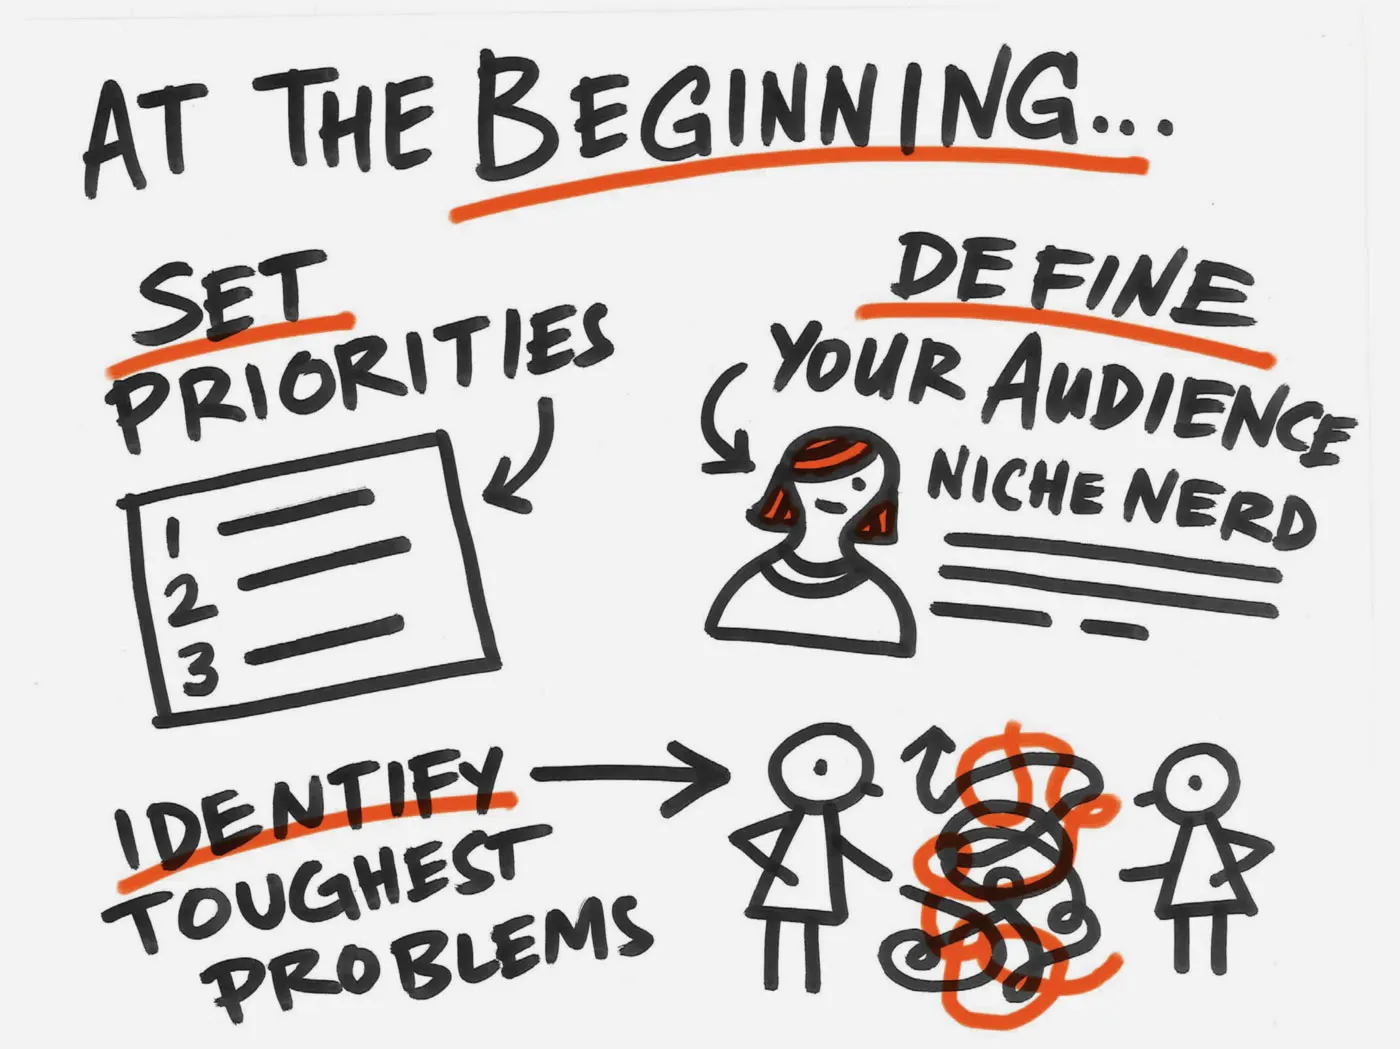 Black marker sketches alongside the words: "At the beginning... Set priorities. Define your audience. Identify toughest problems."